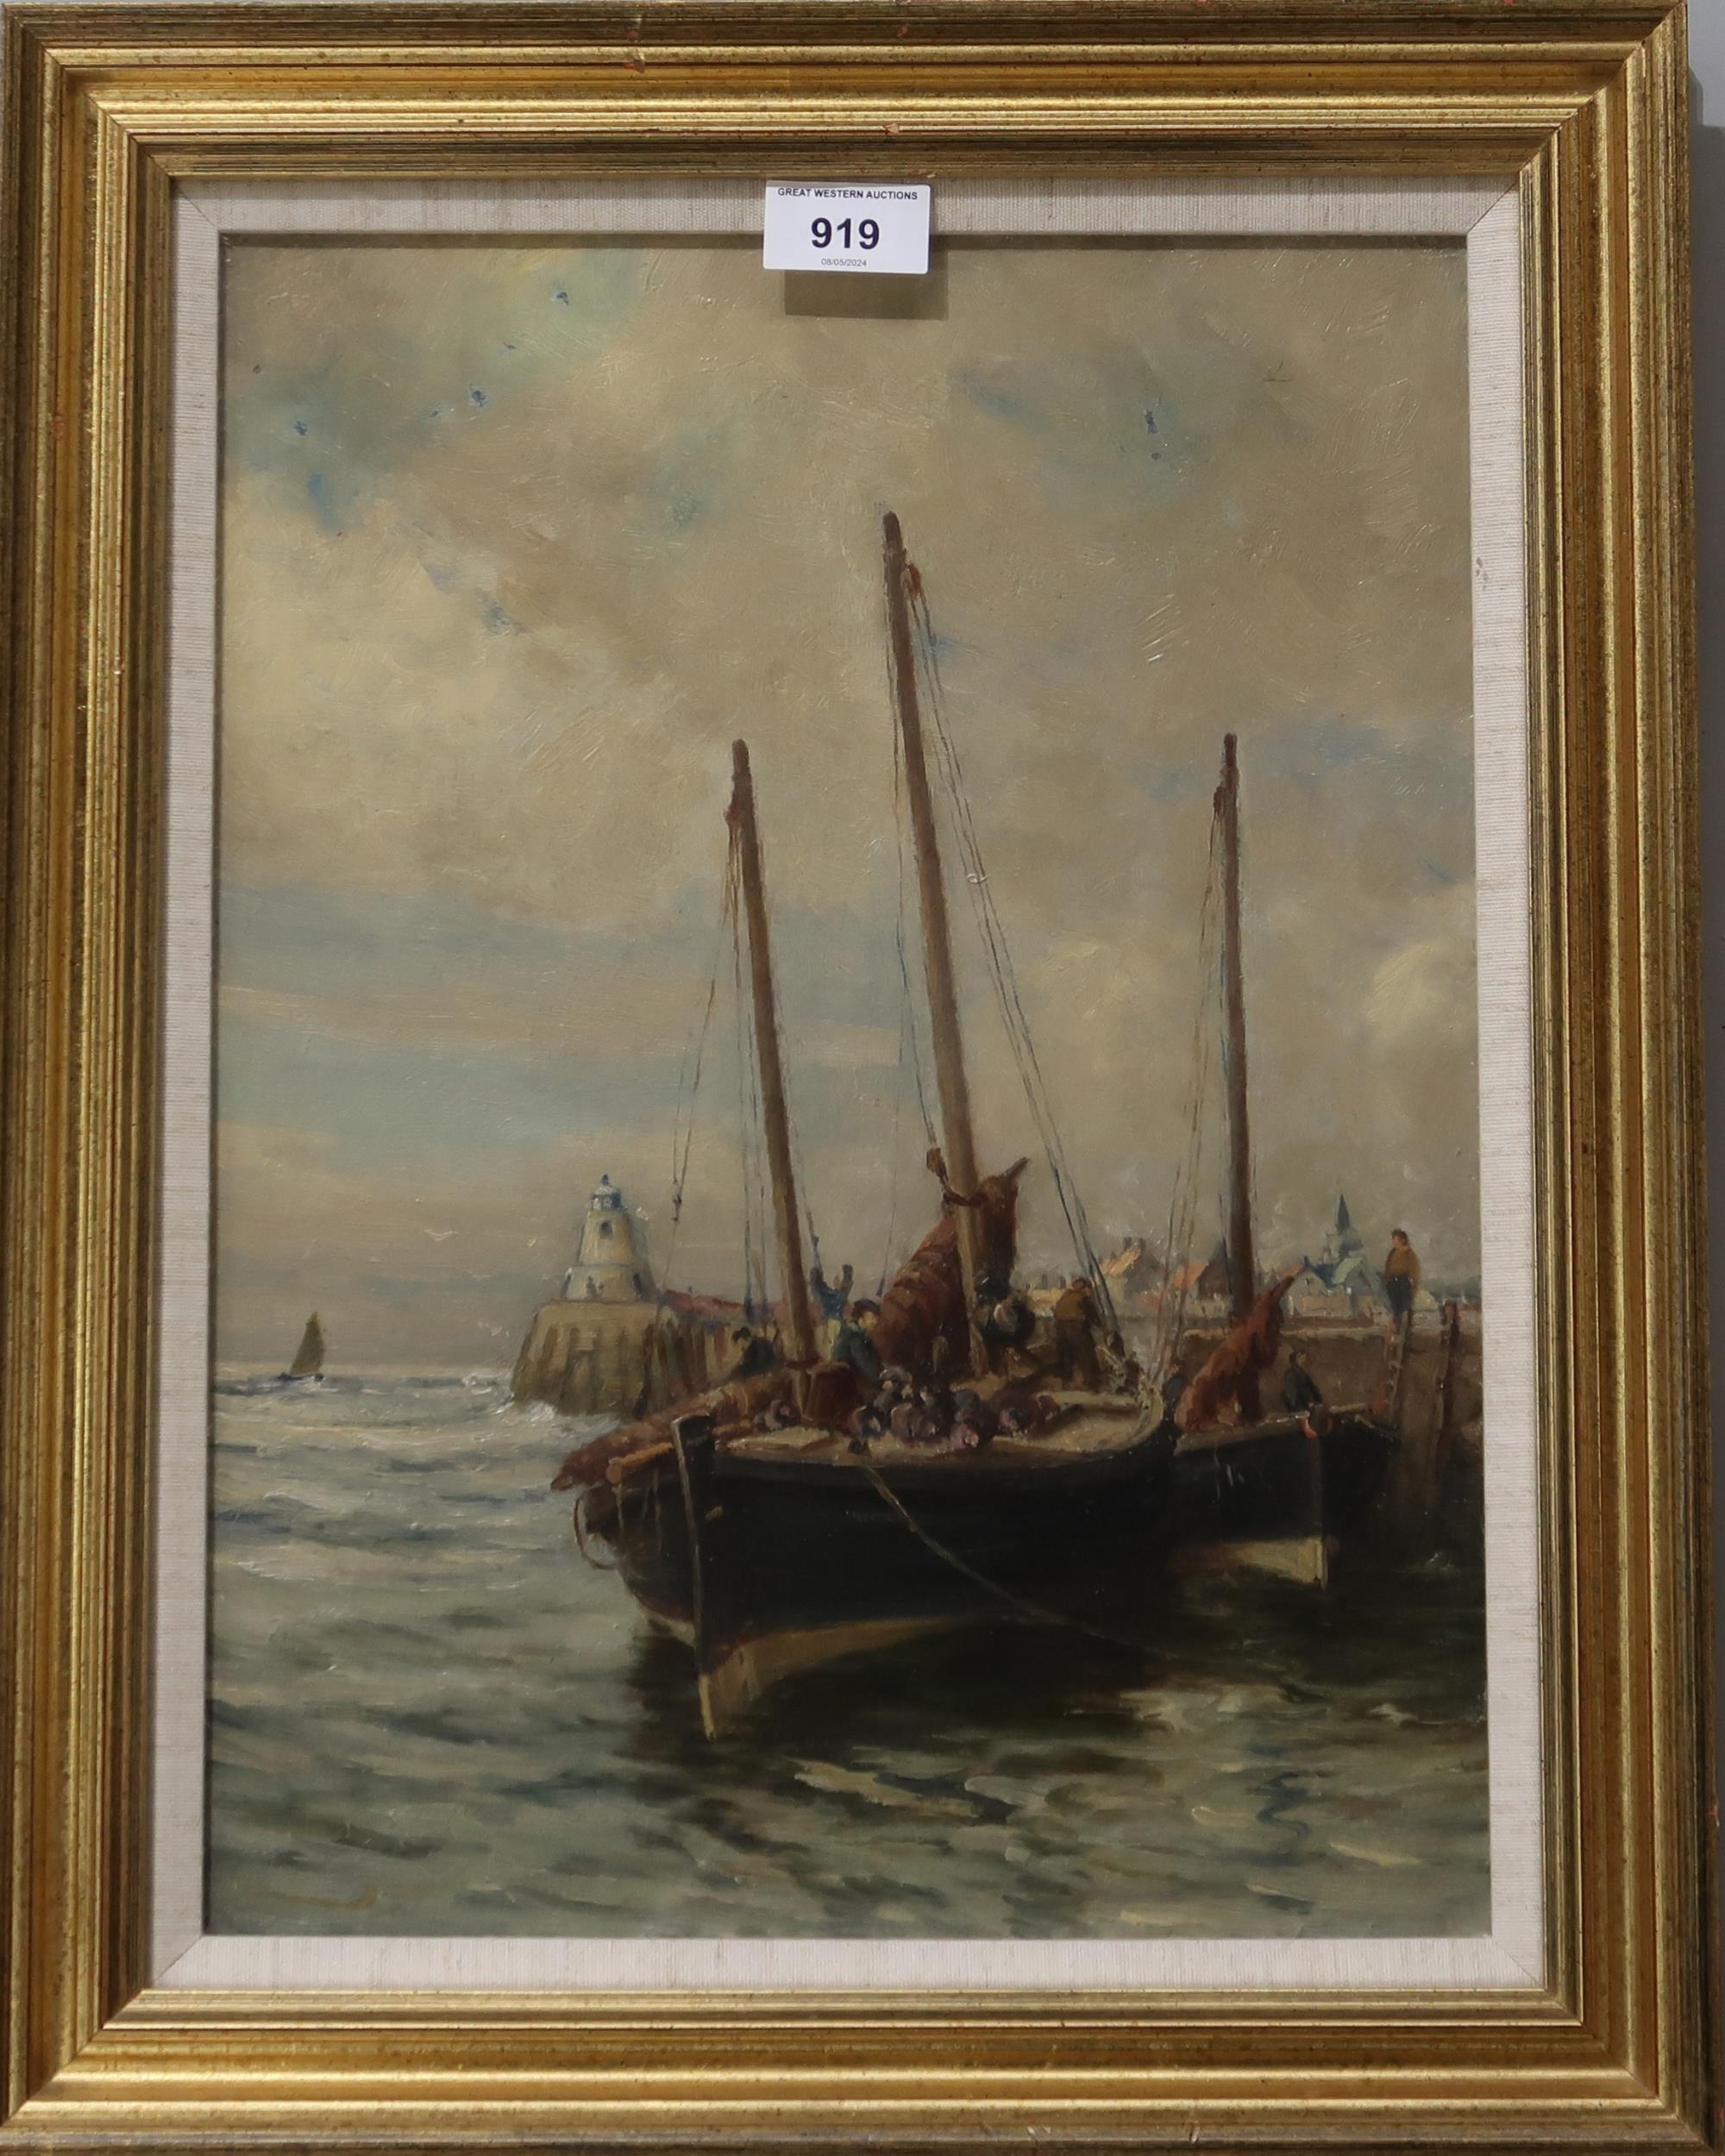 CONTINENTAL SCHOOL  SAILING FROM THE HERBOUR  Oil on panel, 39 x 29cm     Condition Report:Available - Image 2 of 2